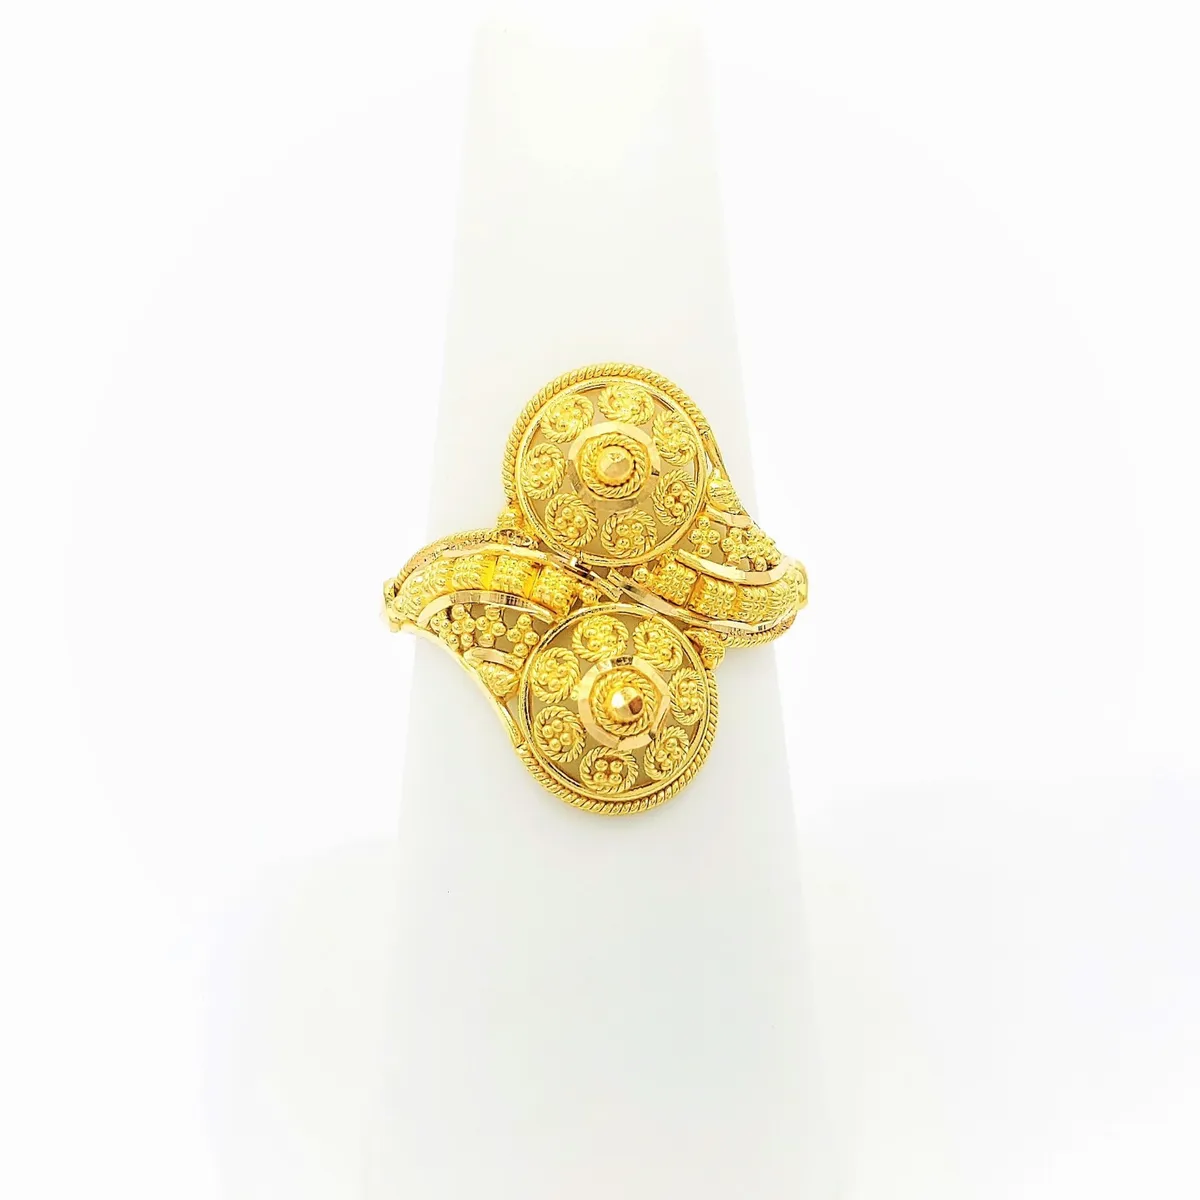 Stunning 22K Solid Yellow Gold Ring Genuine Hallmarked 916 Handcrafted 6.5  US